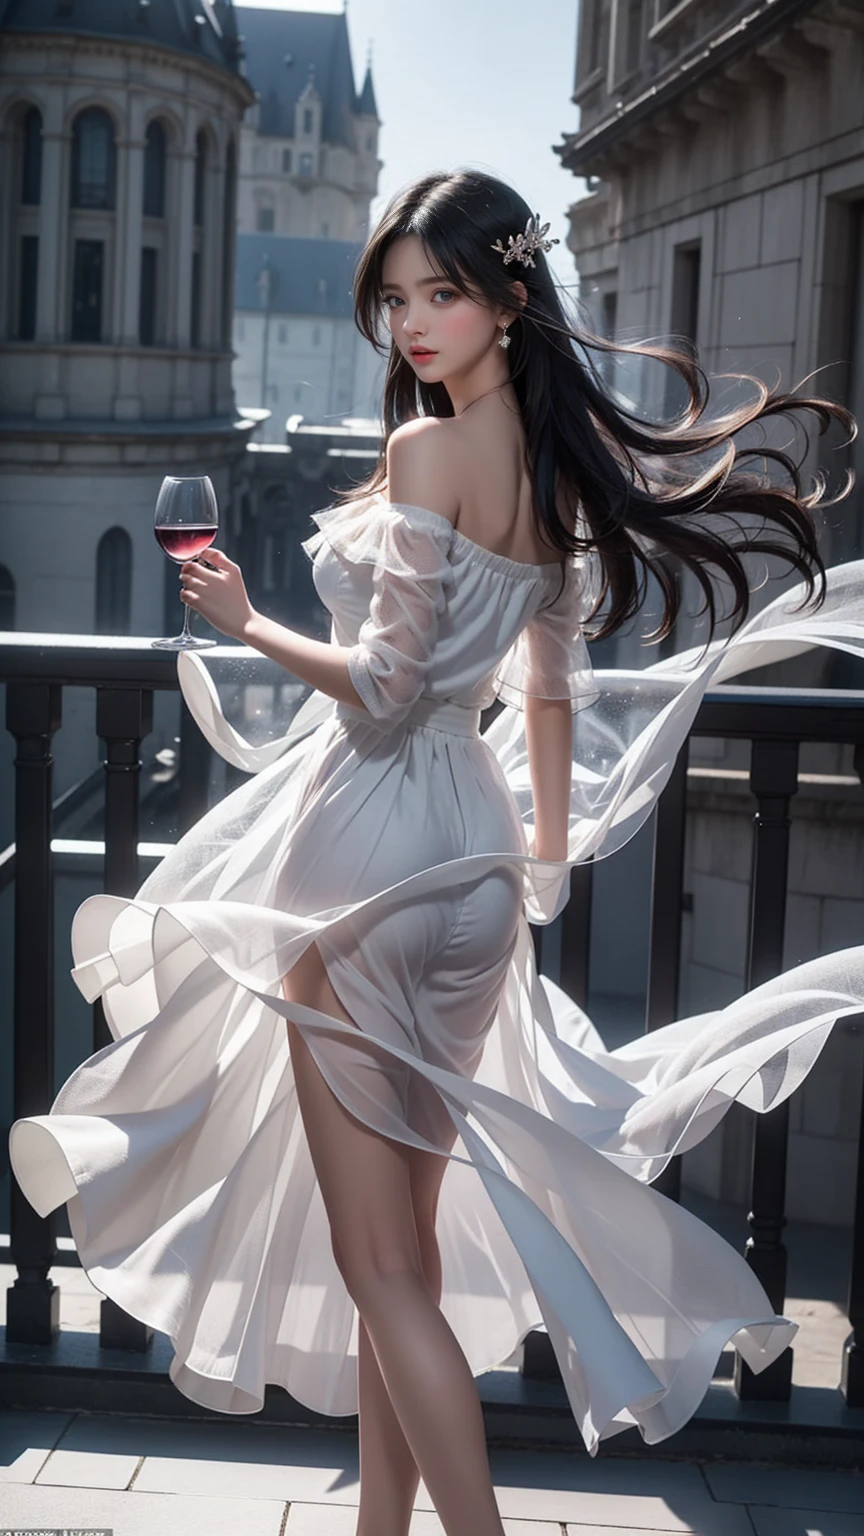 ((Girl standing on balcony of old castle))、((Rear view)),((look back))、Fluorescent color、1 girl、Looking to the side、Beautiful face、Beautiful eyes、（Off the shoulder：1.2）、Upper Body、Shiny Hair、Glowing Skin、 Reduce glare、The proportions of the fingers have been adjusted、Escrow、ass pov、Dynamic Angle、(((Master part)))、(((highest quality)))、(((Super-detailed))) detailed）、（An illustration）、（Detailed light）、（Very delicate and beautiful）、Dramatic_Shadow、Ray_Tracking、reflection、 Ultra-high resolution、((A girl with colorful hair and mesh in her black hair))、 Her hair flutters in the wind、(Large deep blue eyes)、Black Haired Woman、 Sparkling Butterfly、Black-haired woman、Points of light around the woman、Magical Aura、Green dot、Aura About Natural、超Magical AuraBlack-haired woman,((White off-the-shoulder semi-transparent white dress:1.3))、(No sleeve)、((My skirt is flying up in the wind)),((An old European castle is hazy in the distance)),((White panties are visible)),((One hand holds a wine glass)),